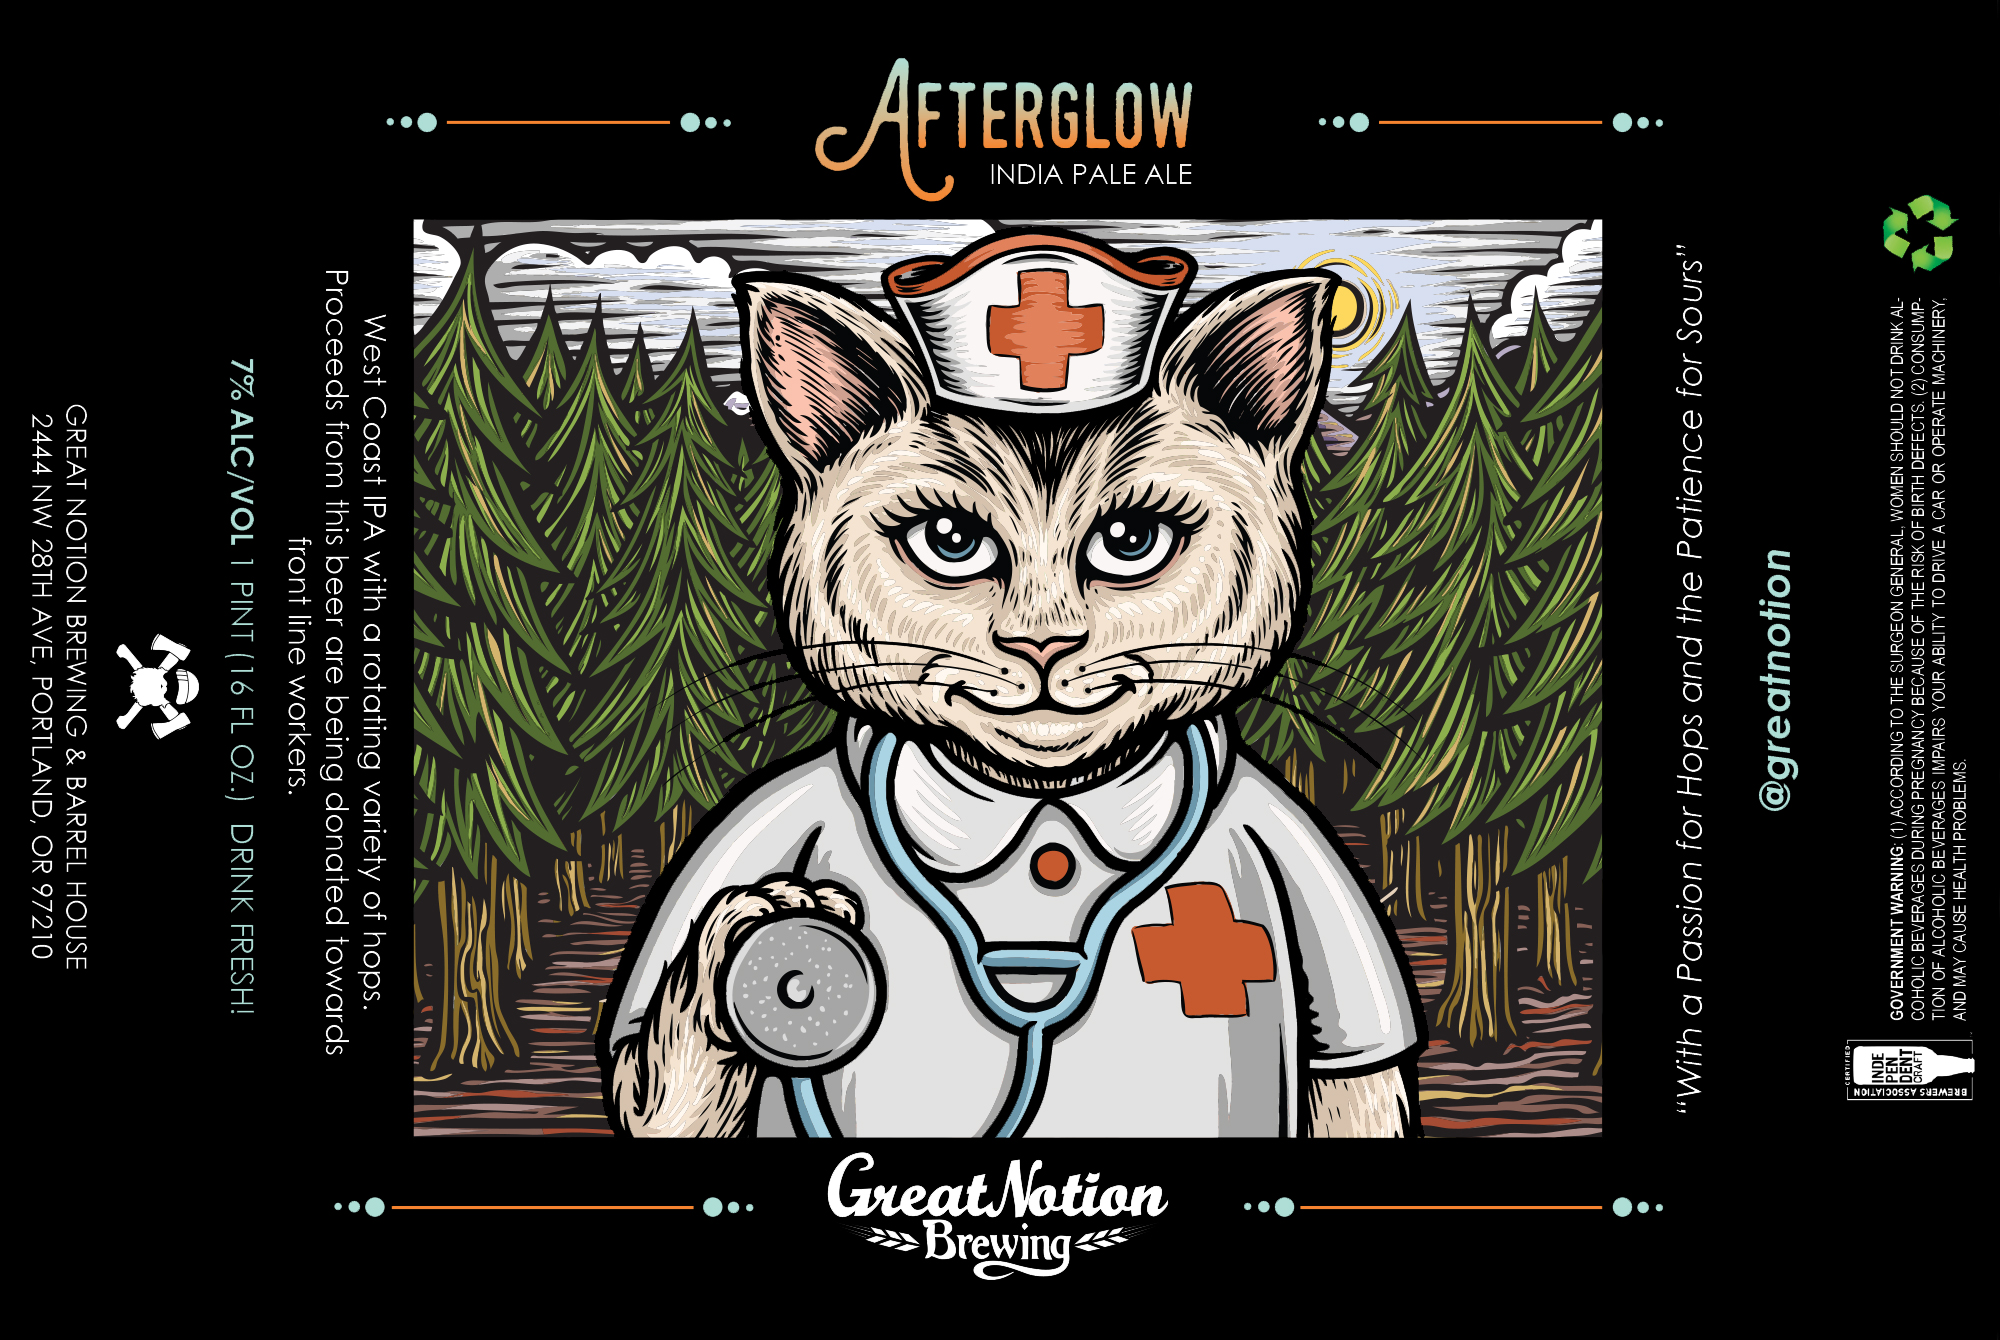 Great Notion Brews Three Beers To Help Those Affected By Coronavirus